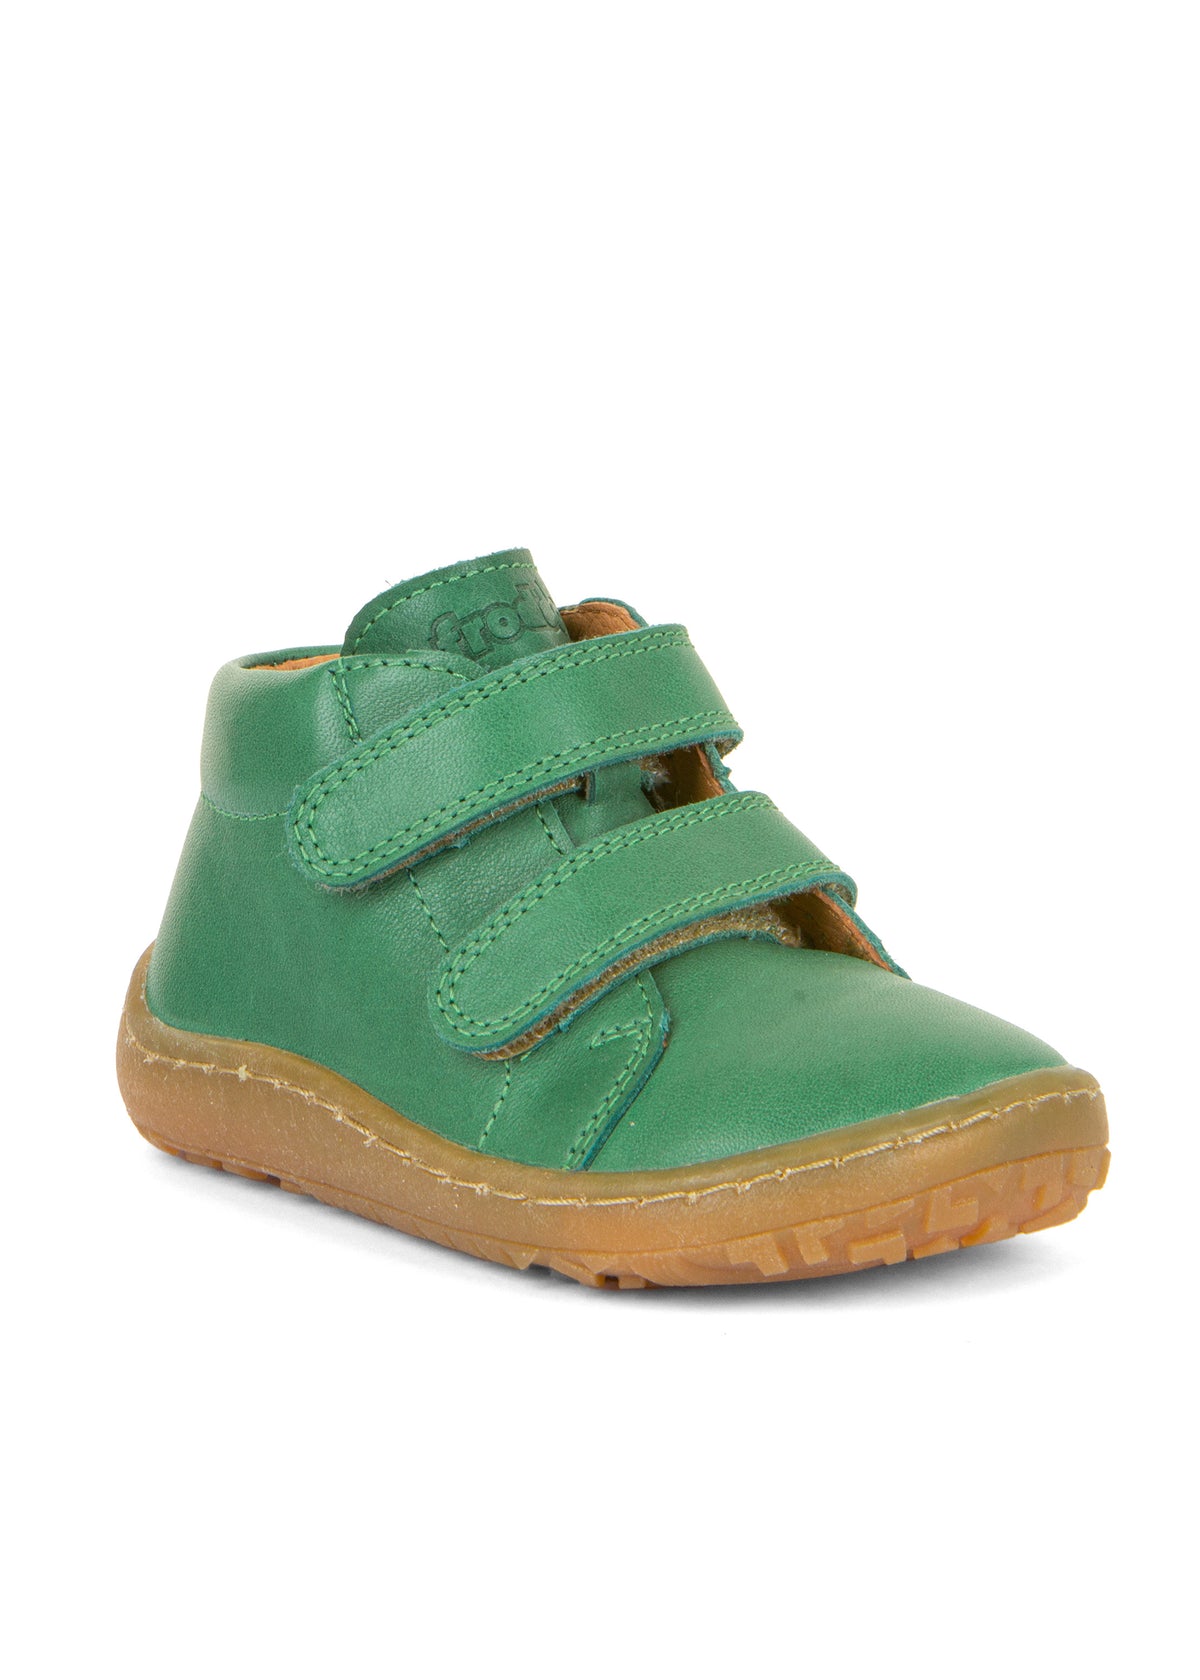 Children's barefoot shoes - green leather, Barefoot First Step